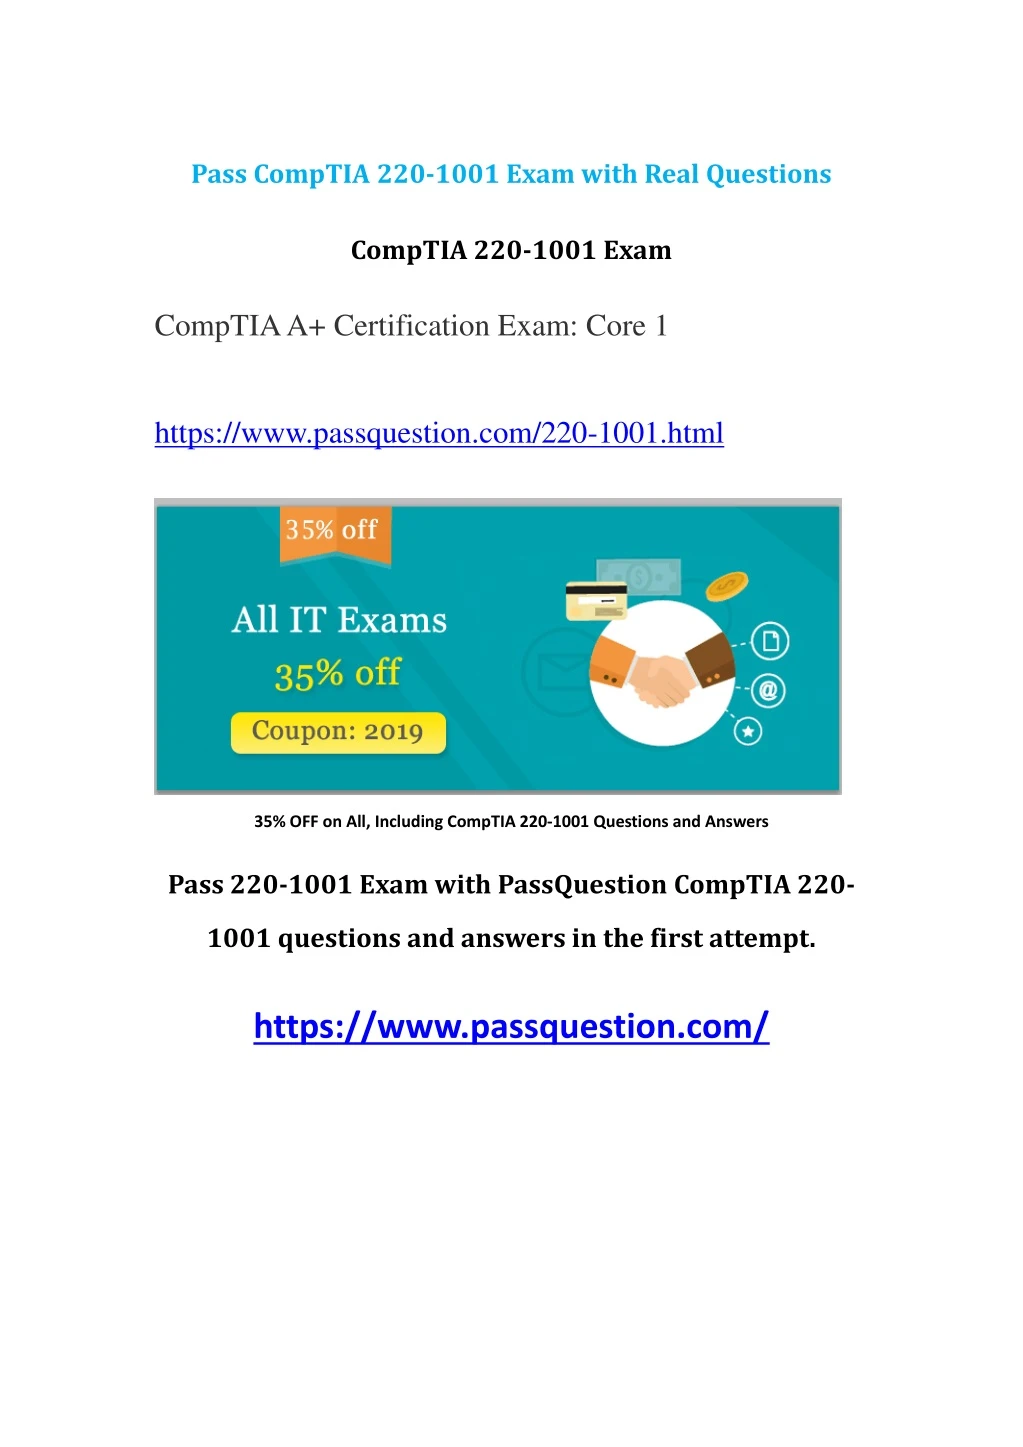 Ppt Comptia 220 1001 Free Exam Questions V1002 Passquestion Real Qandas Powerpoint 2191